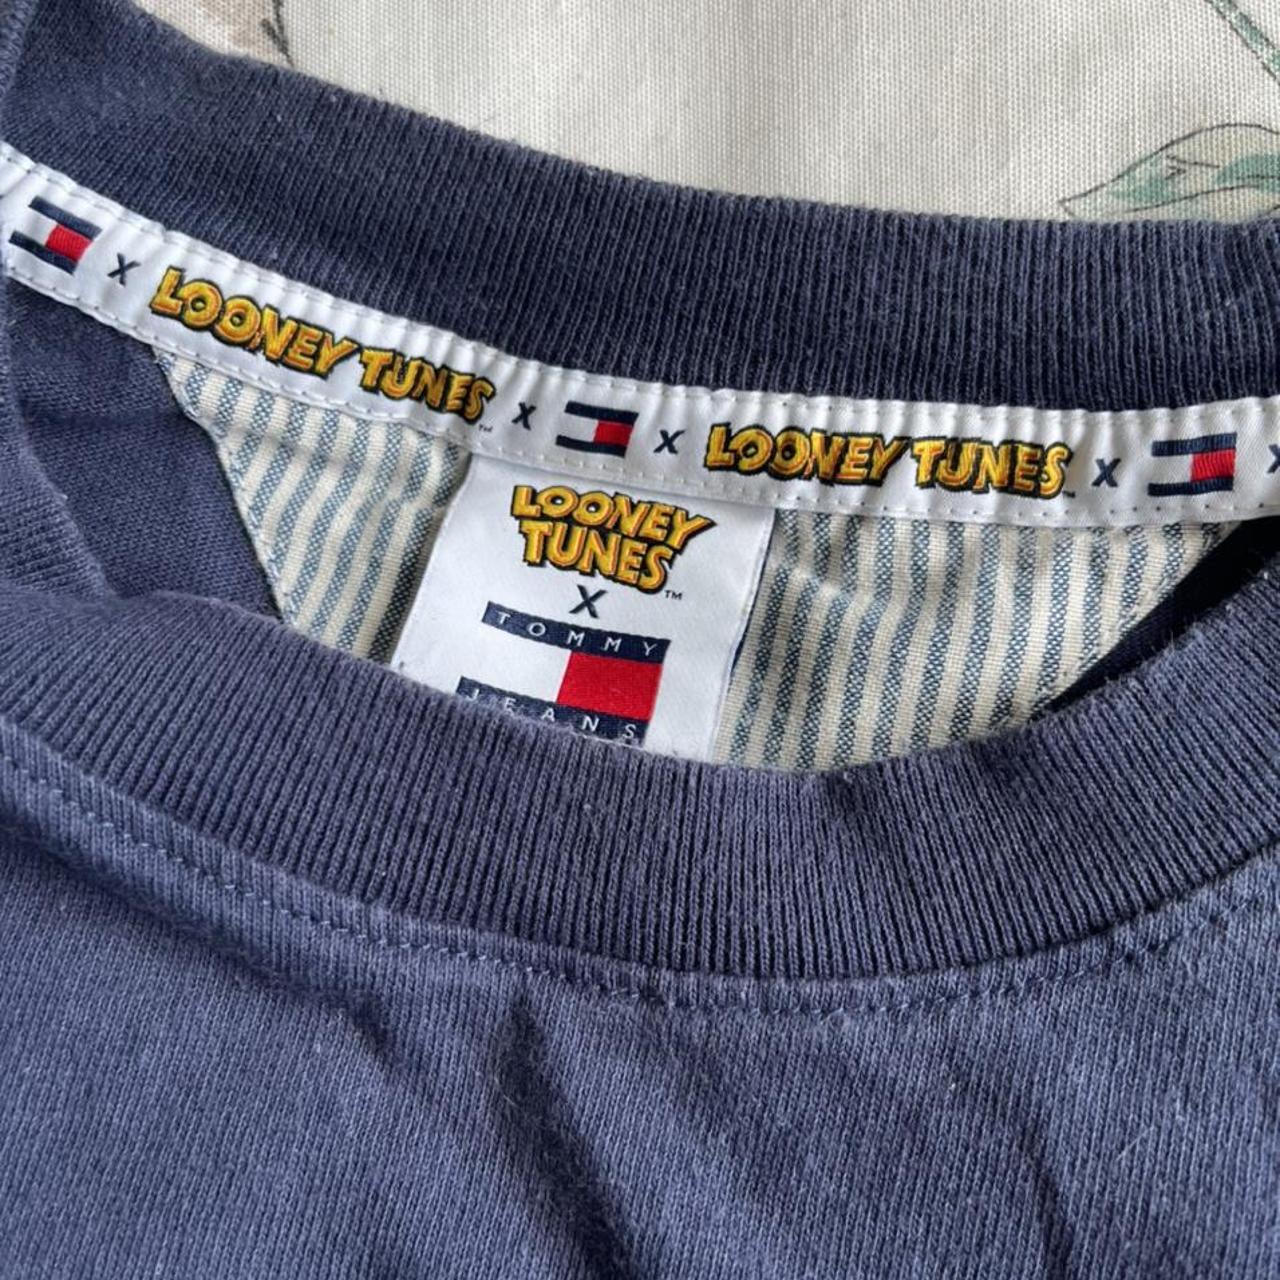 Tommy Hilfiger X Looney Toons top #tommy... - Depop